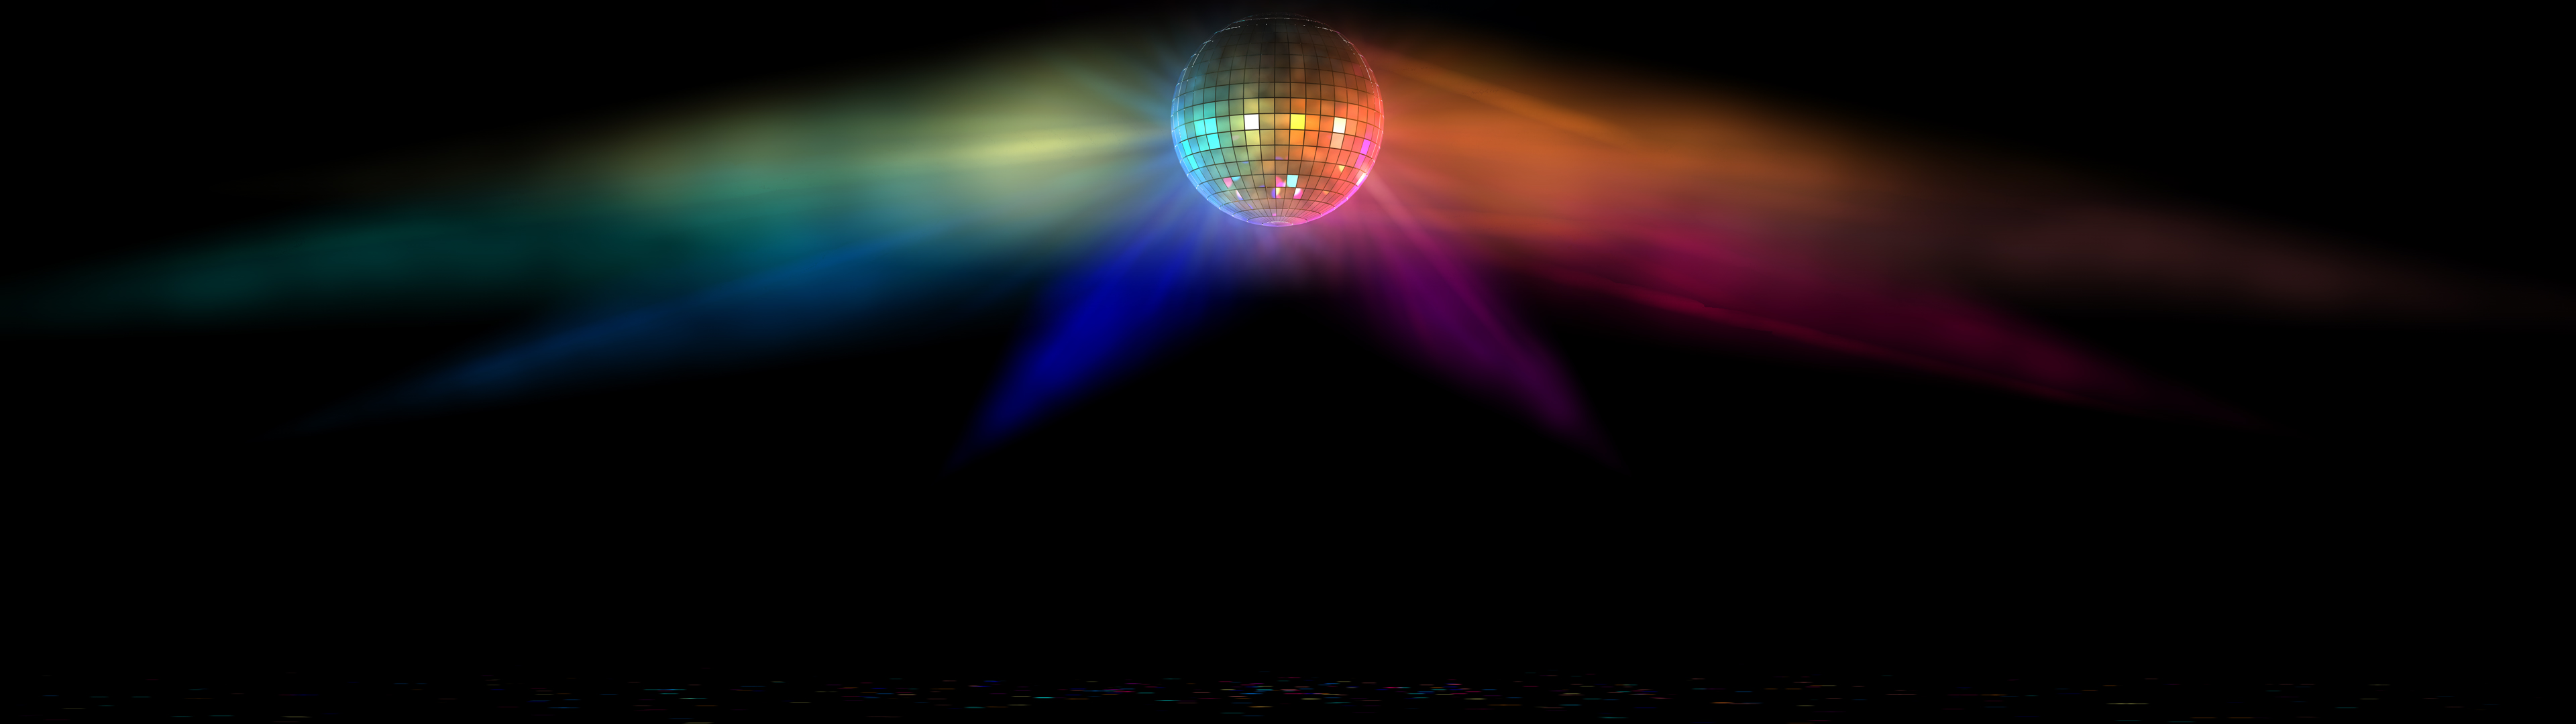 wall shiny disco ball wallpaper for those of you who love to dance we